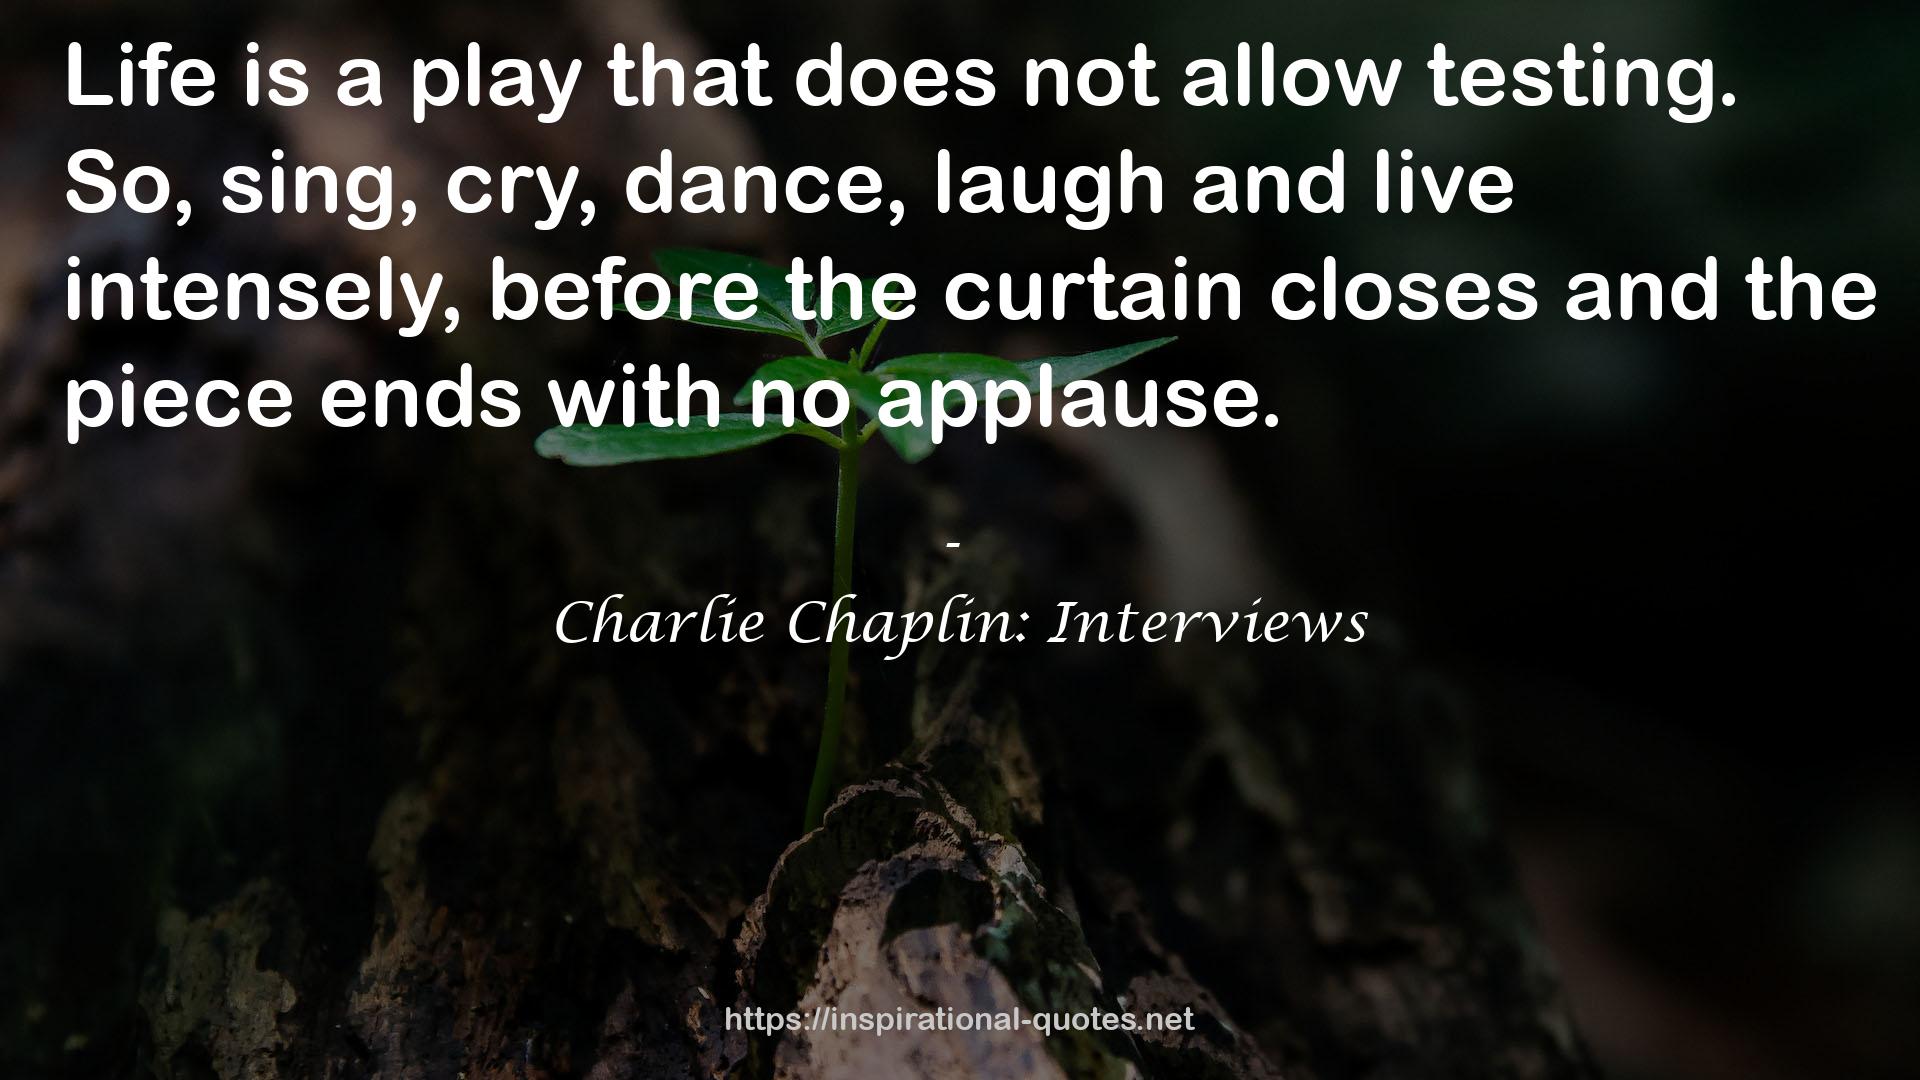 Charlie Chaplin: Interviews QUOTES